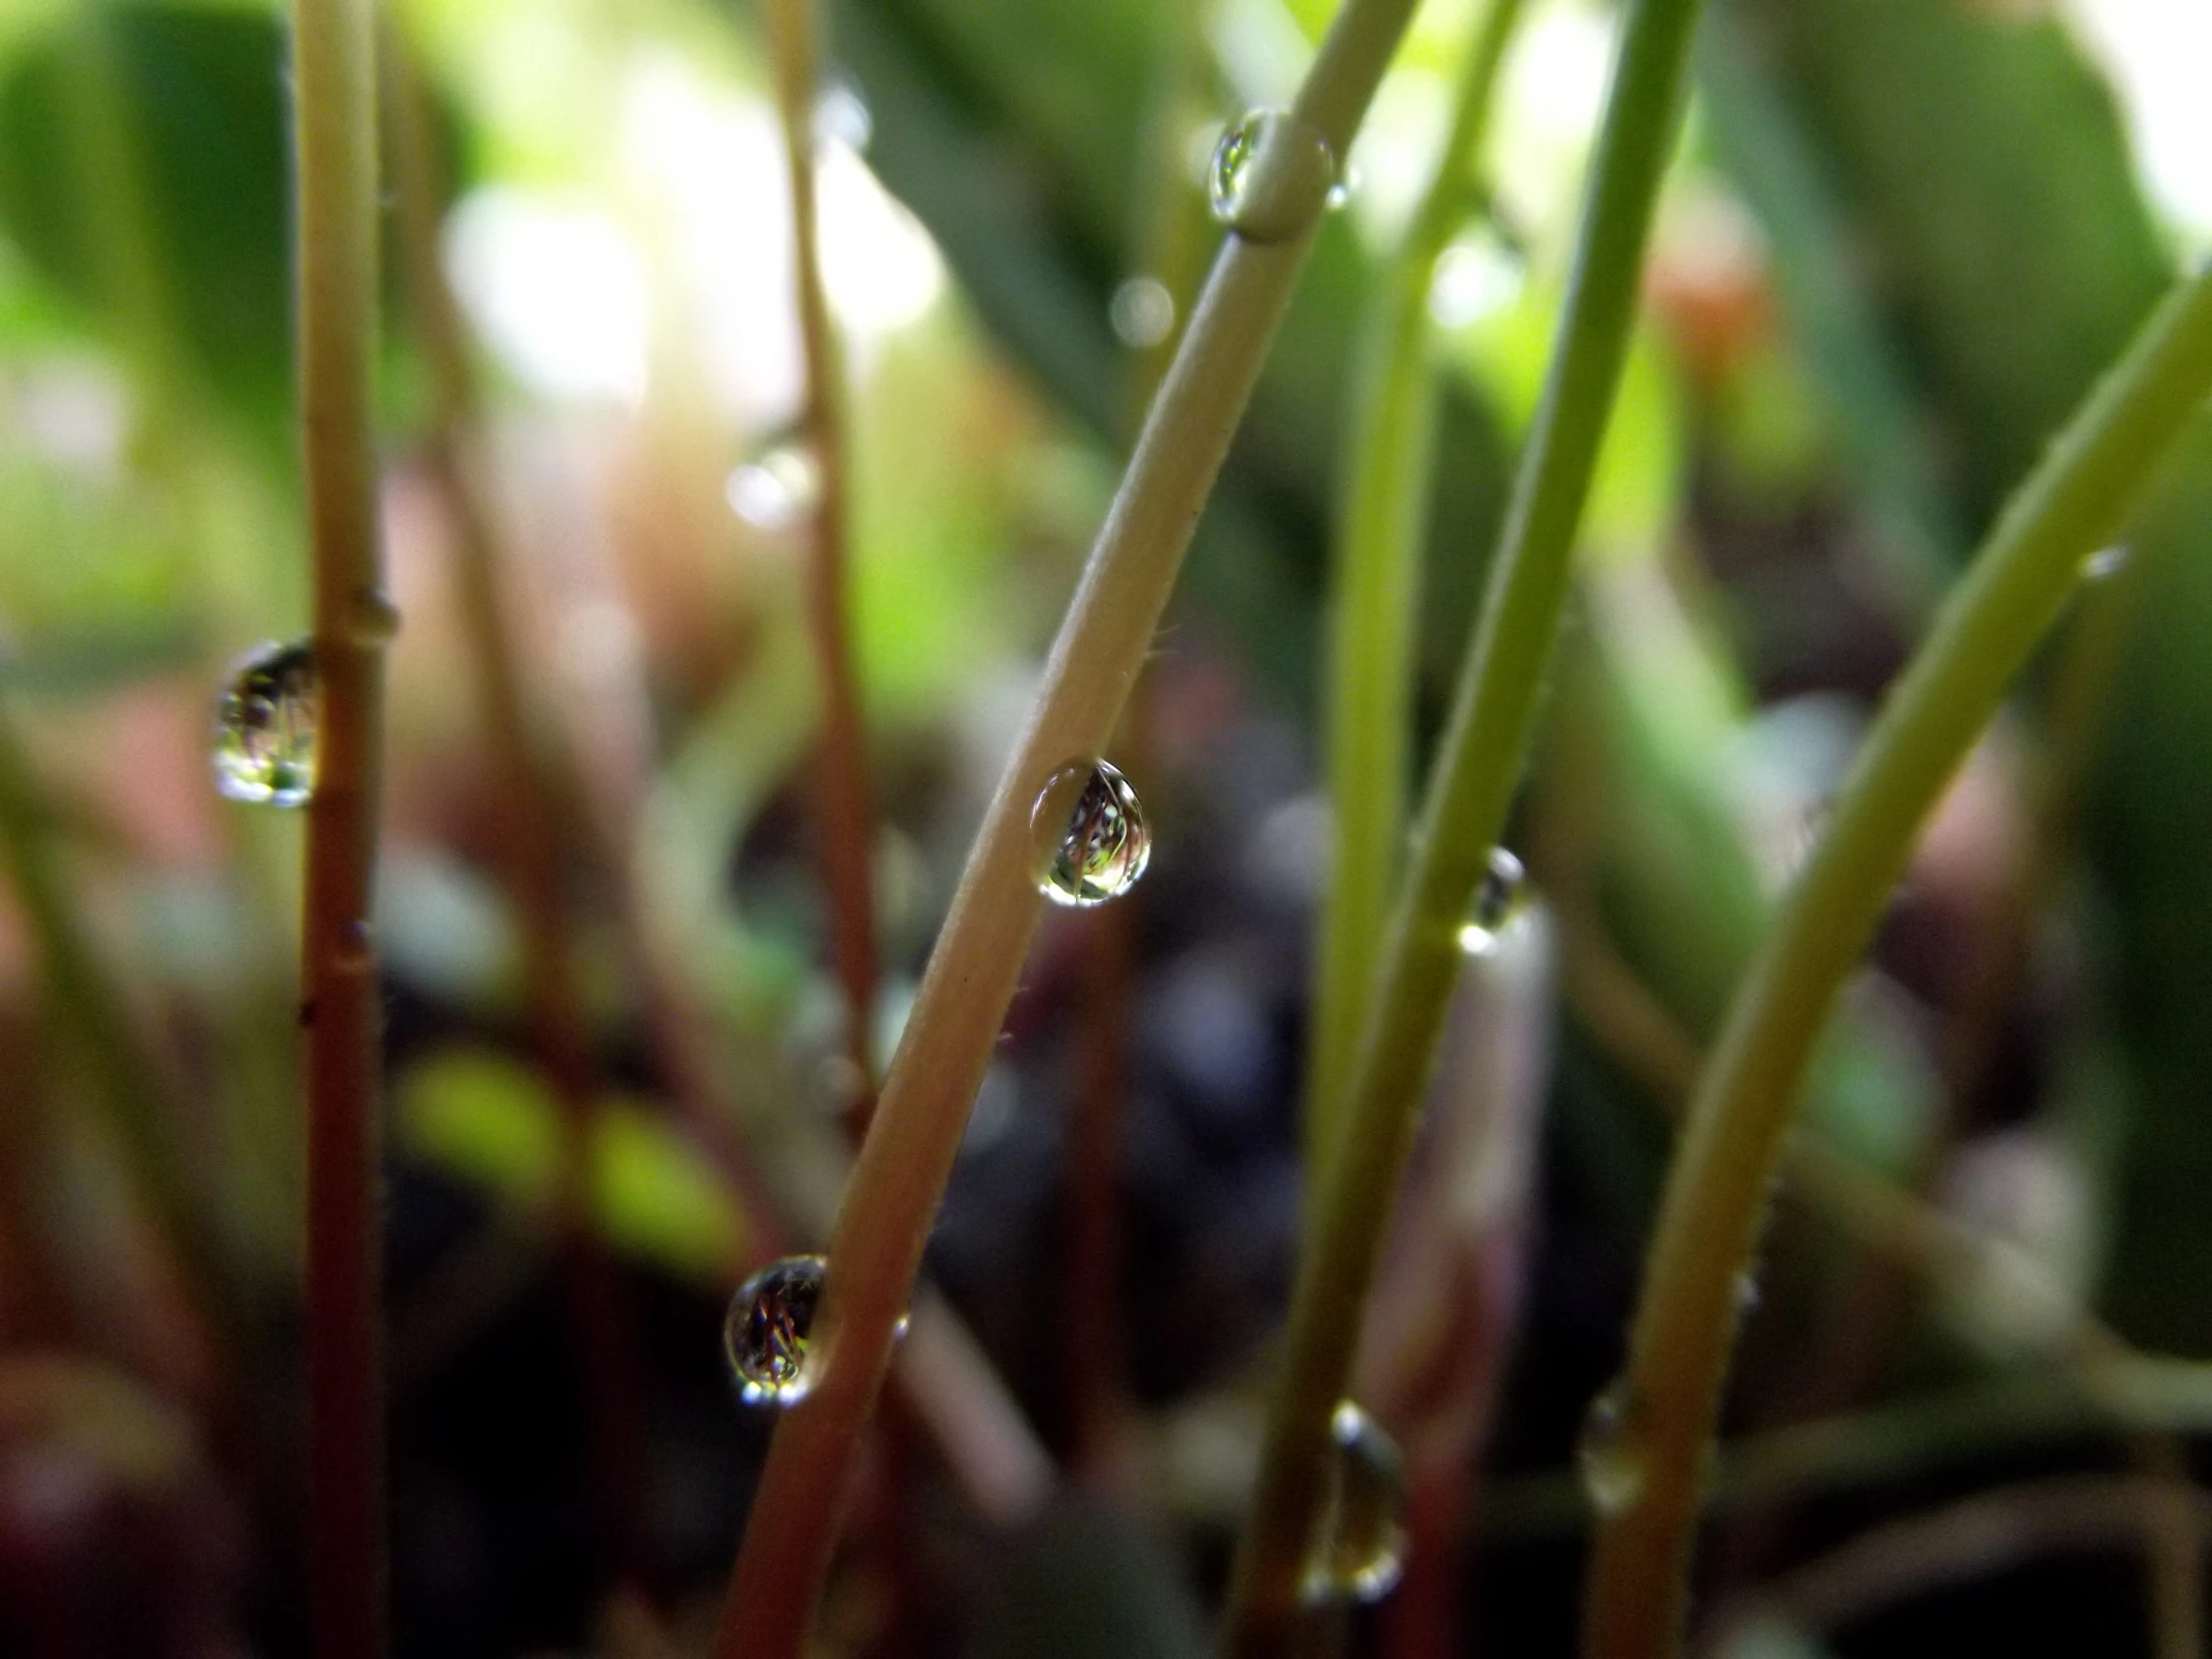 the drops of water that were on a green plant